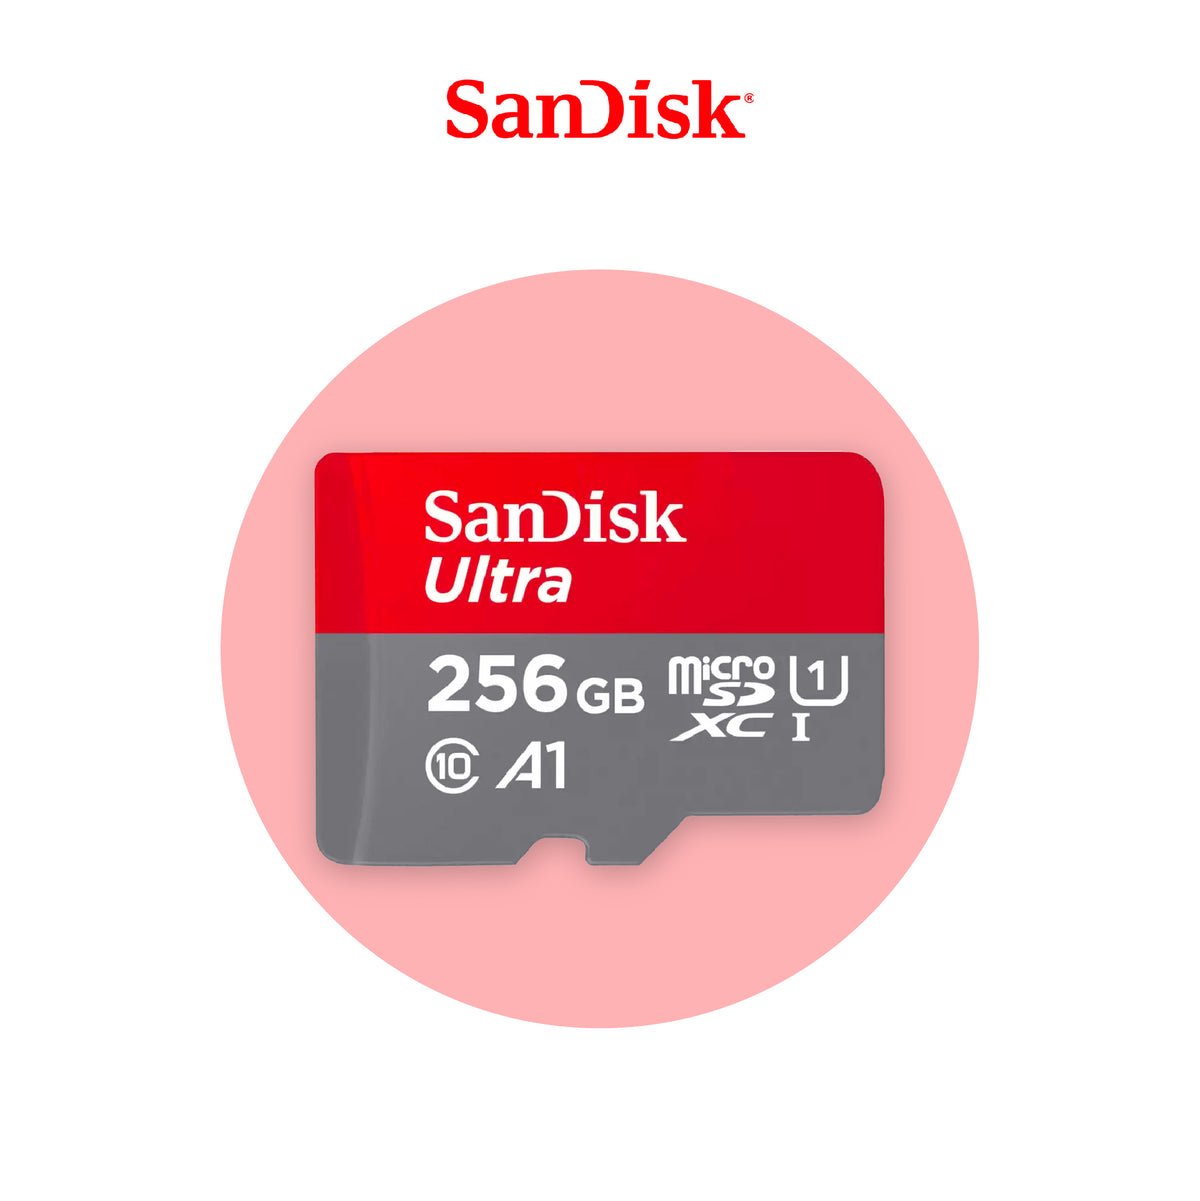 Sandisk Micro SD Ultra A1